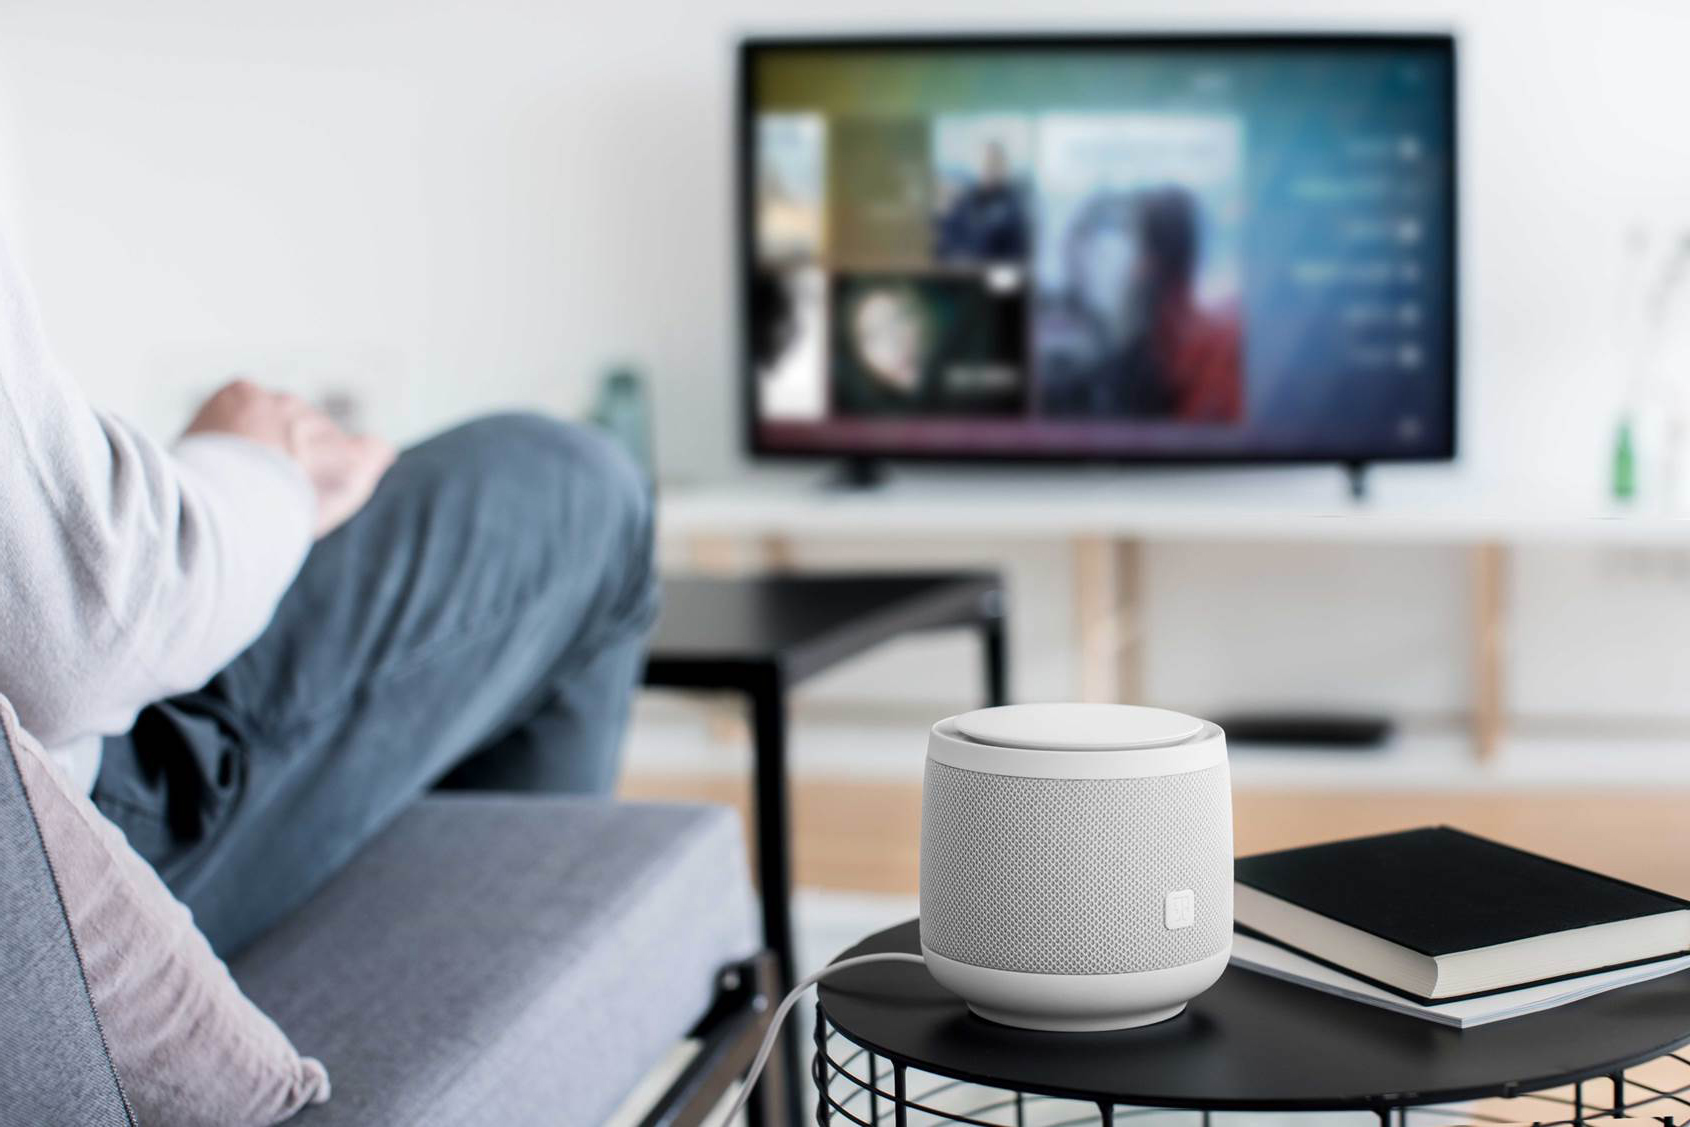 With microphones and audio technology from the Fraunhofer IDMT in Oldenburg: The Telekom Smart Speaker starts selling at IFA 2019